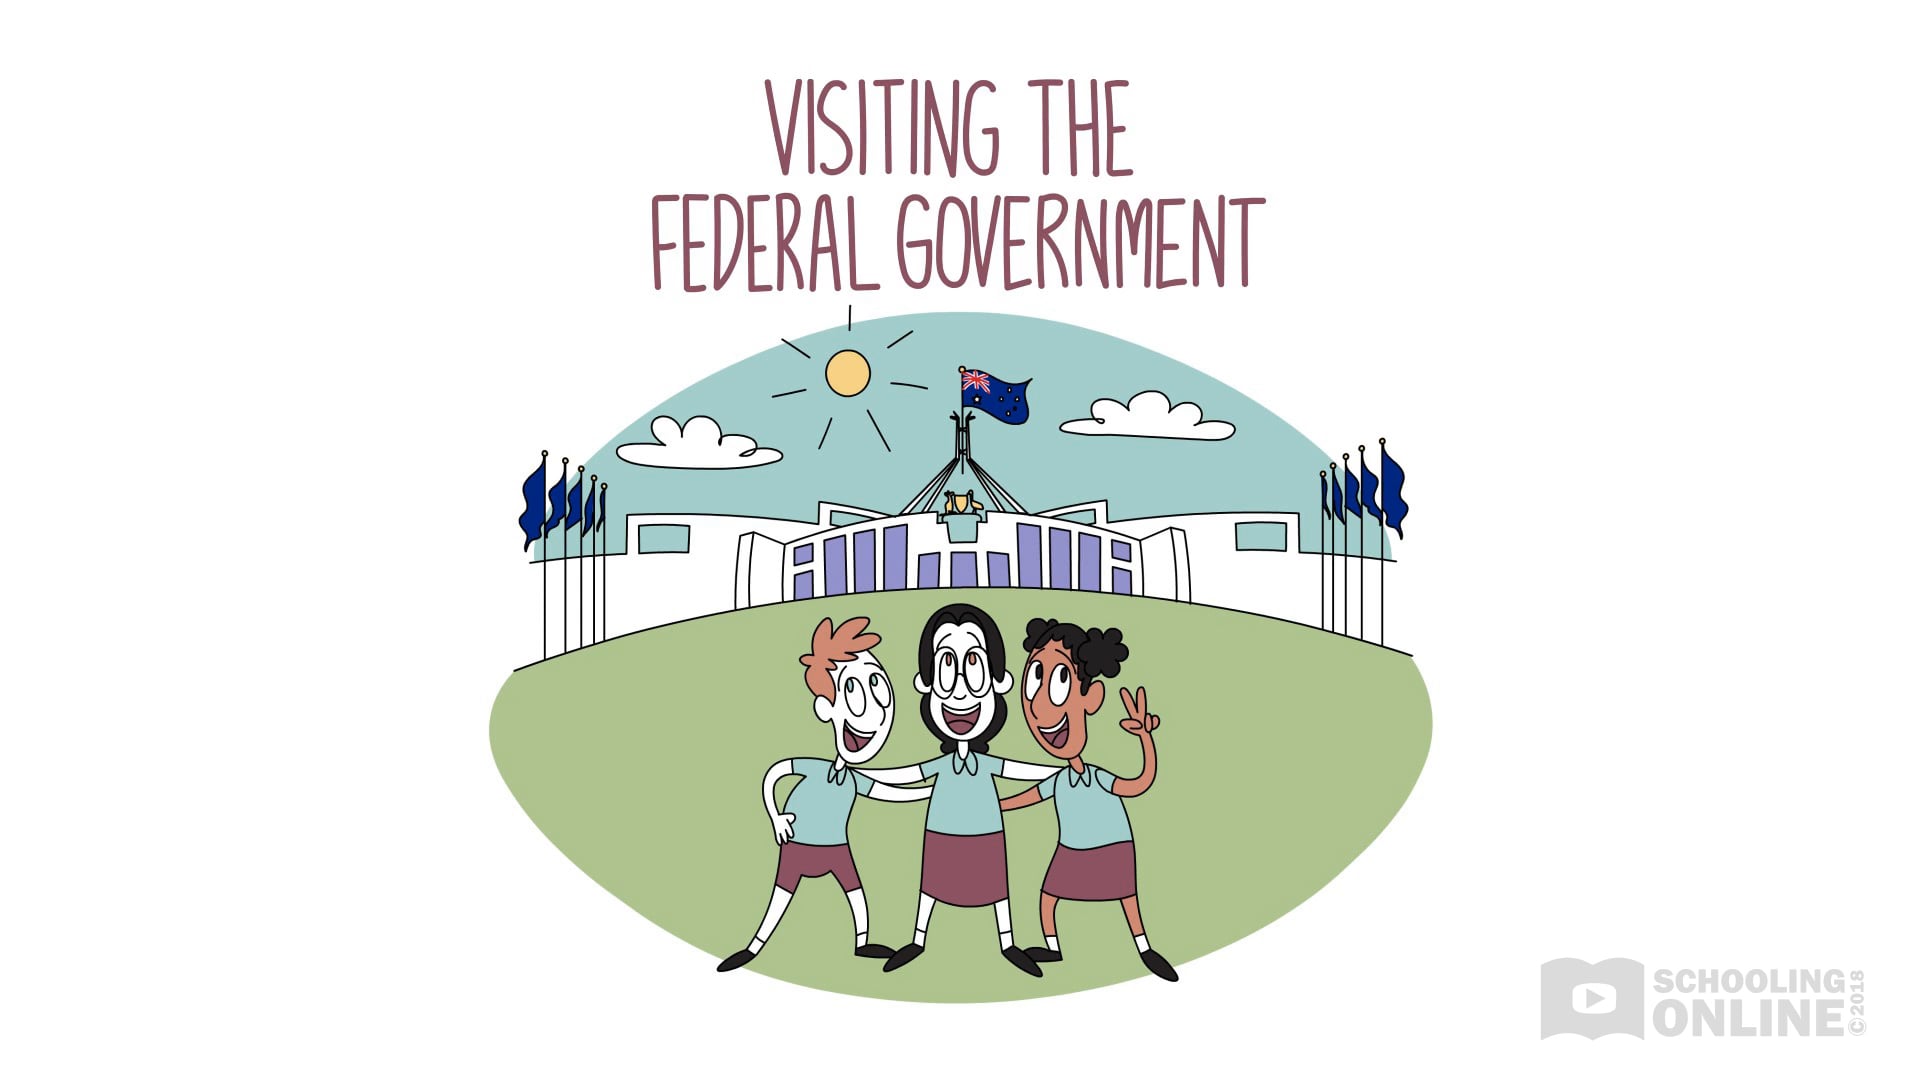 Australia as a Nation 2 - Visiting the Federal Government